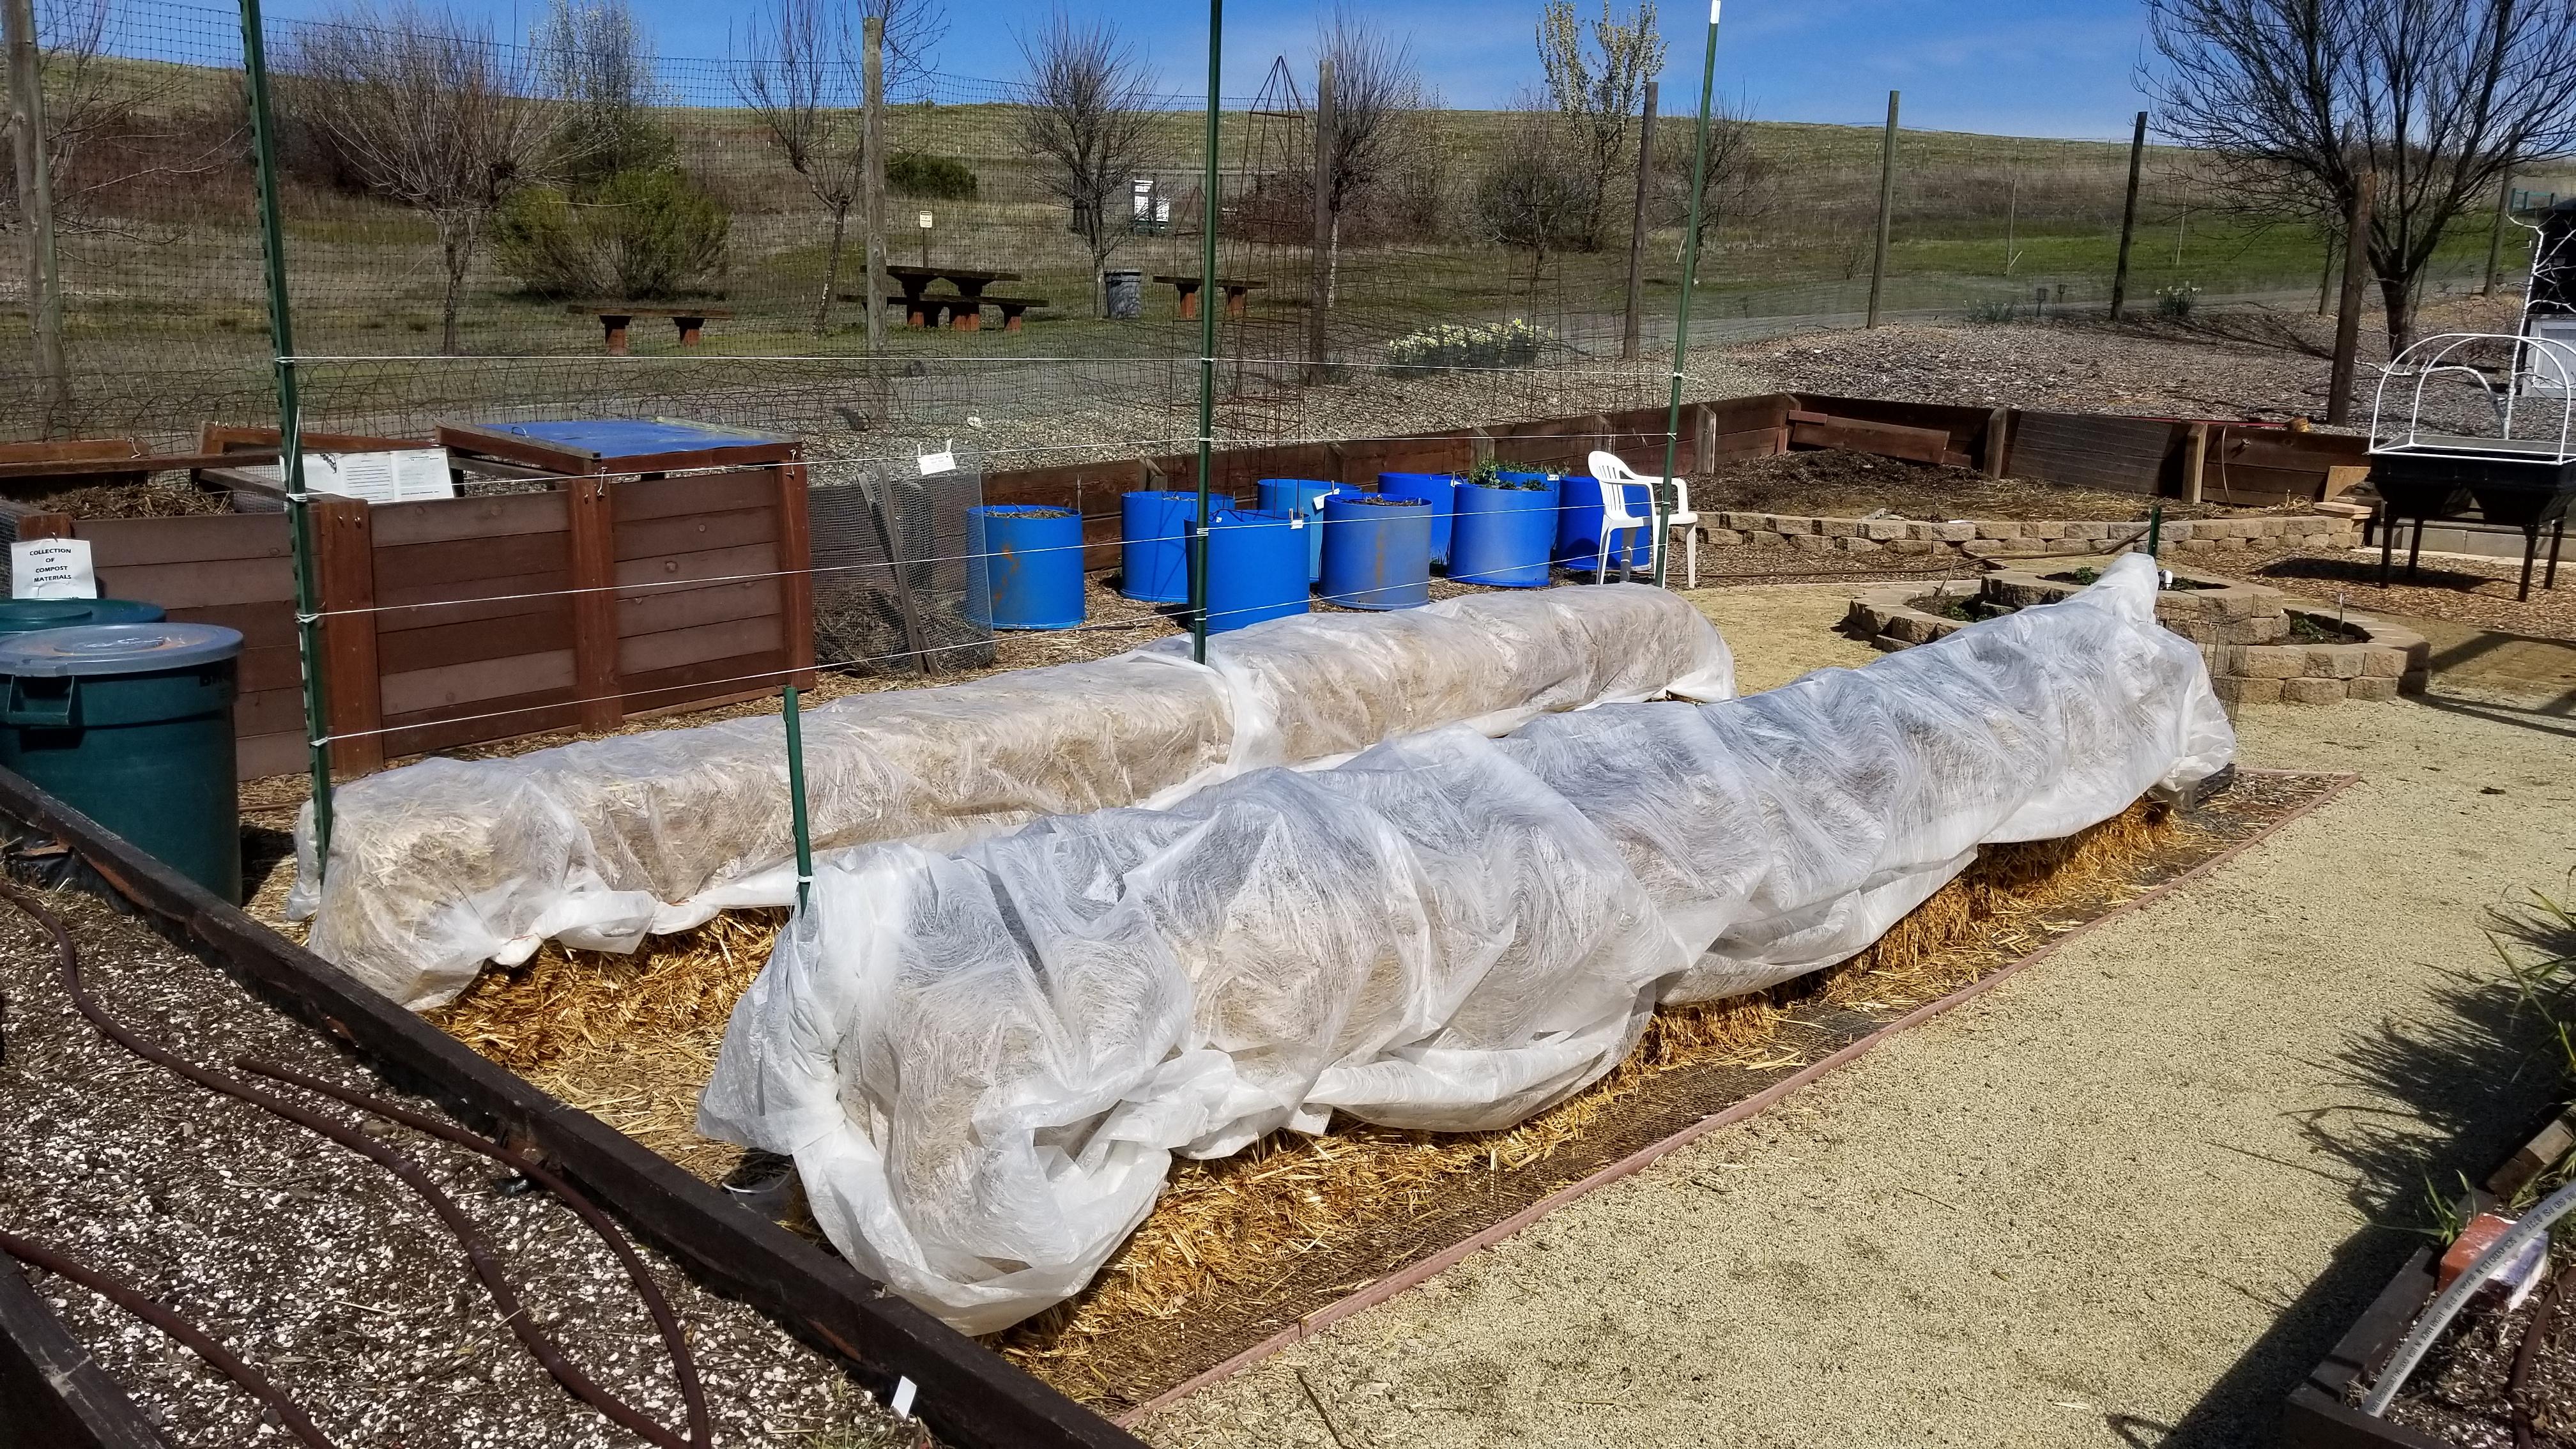 3-7-2018, The addition of row covers for weather and critter protection